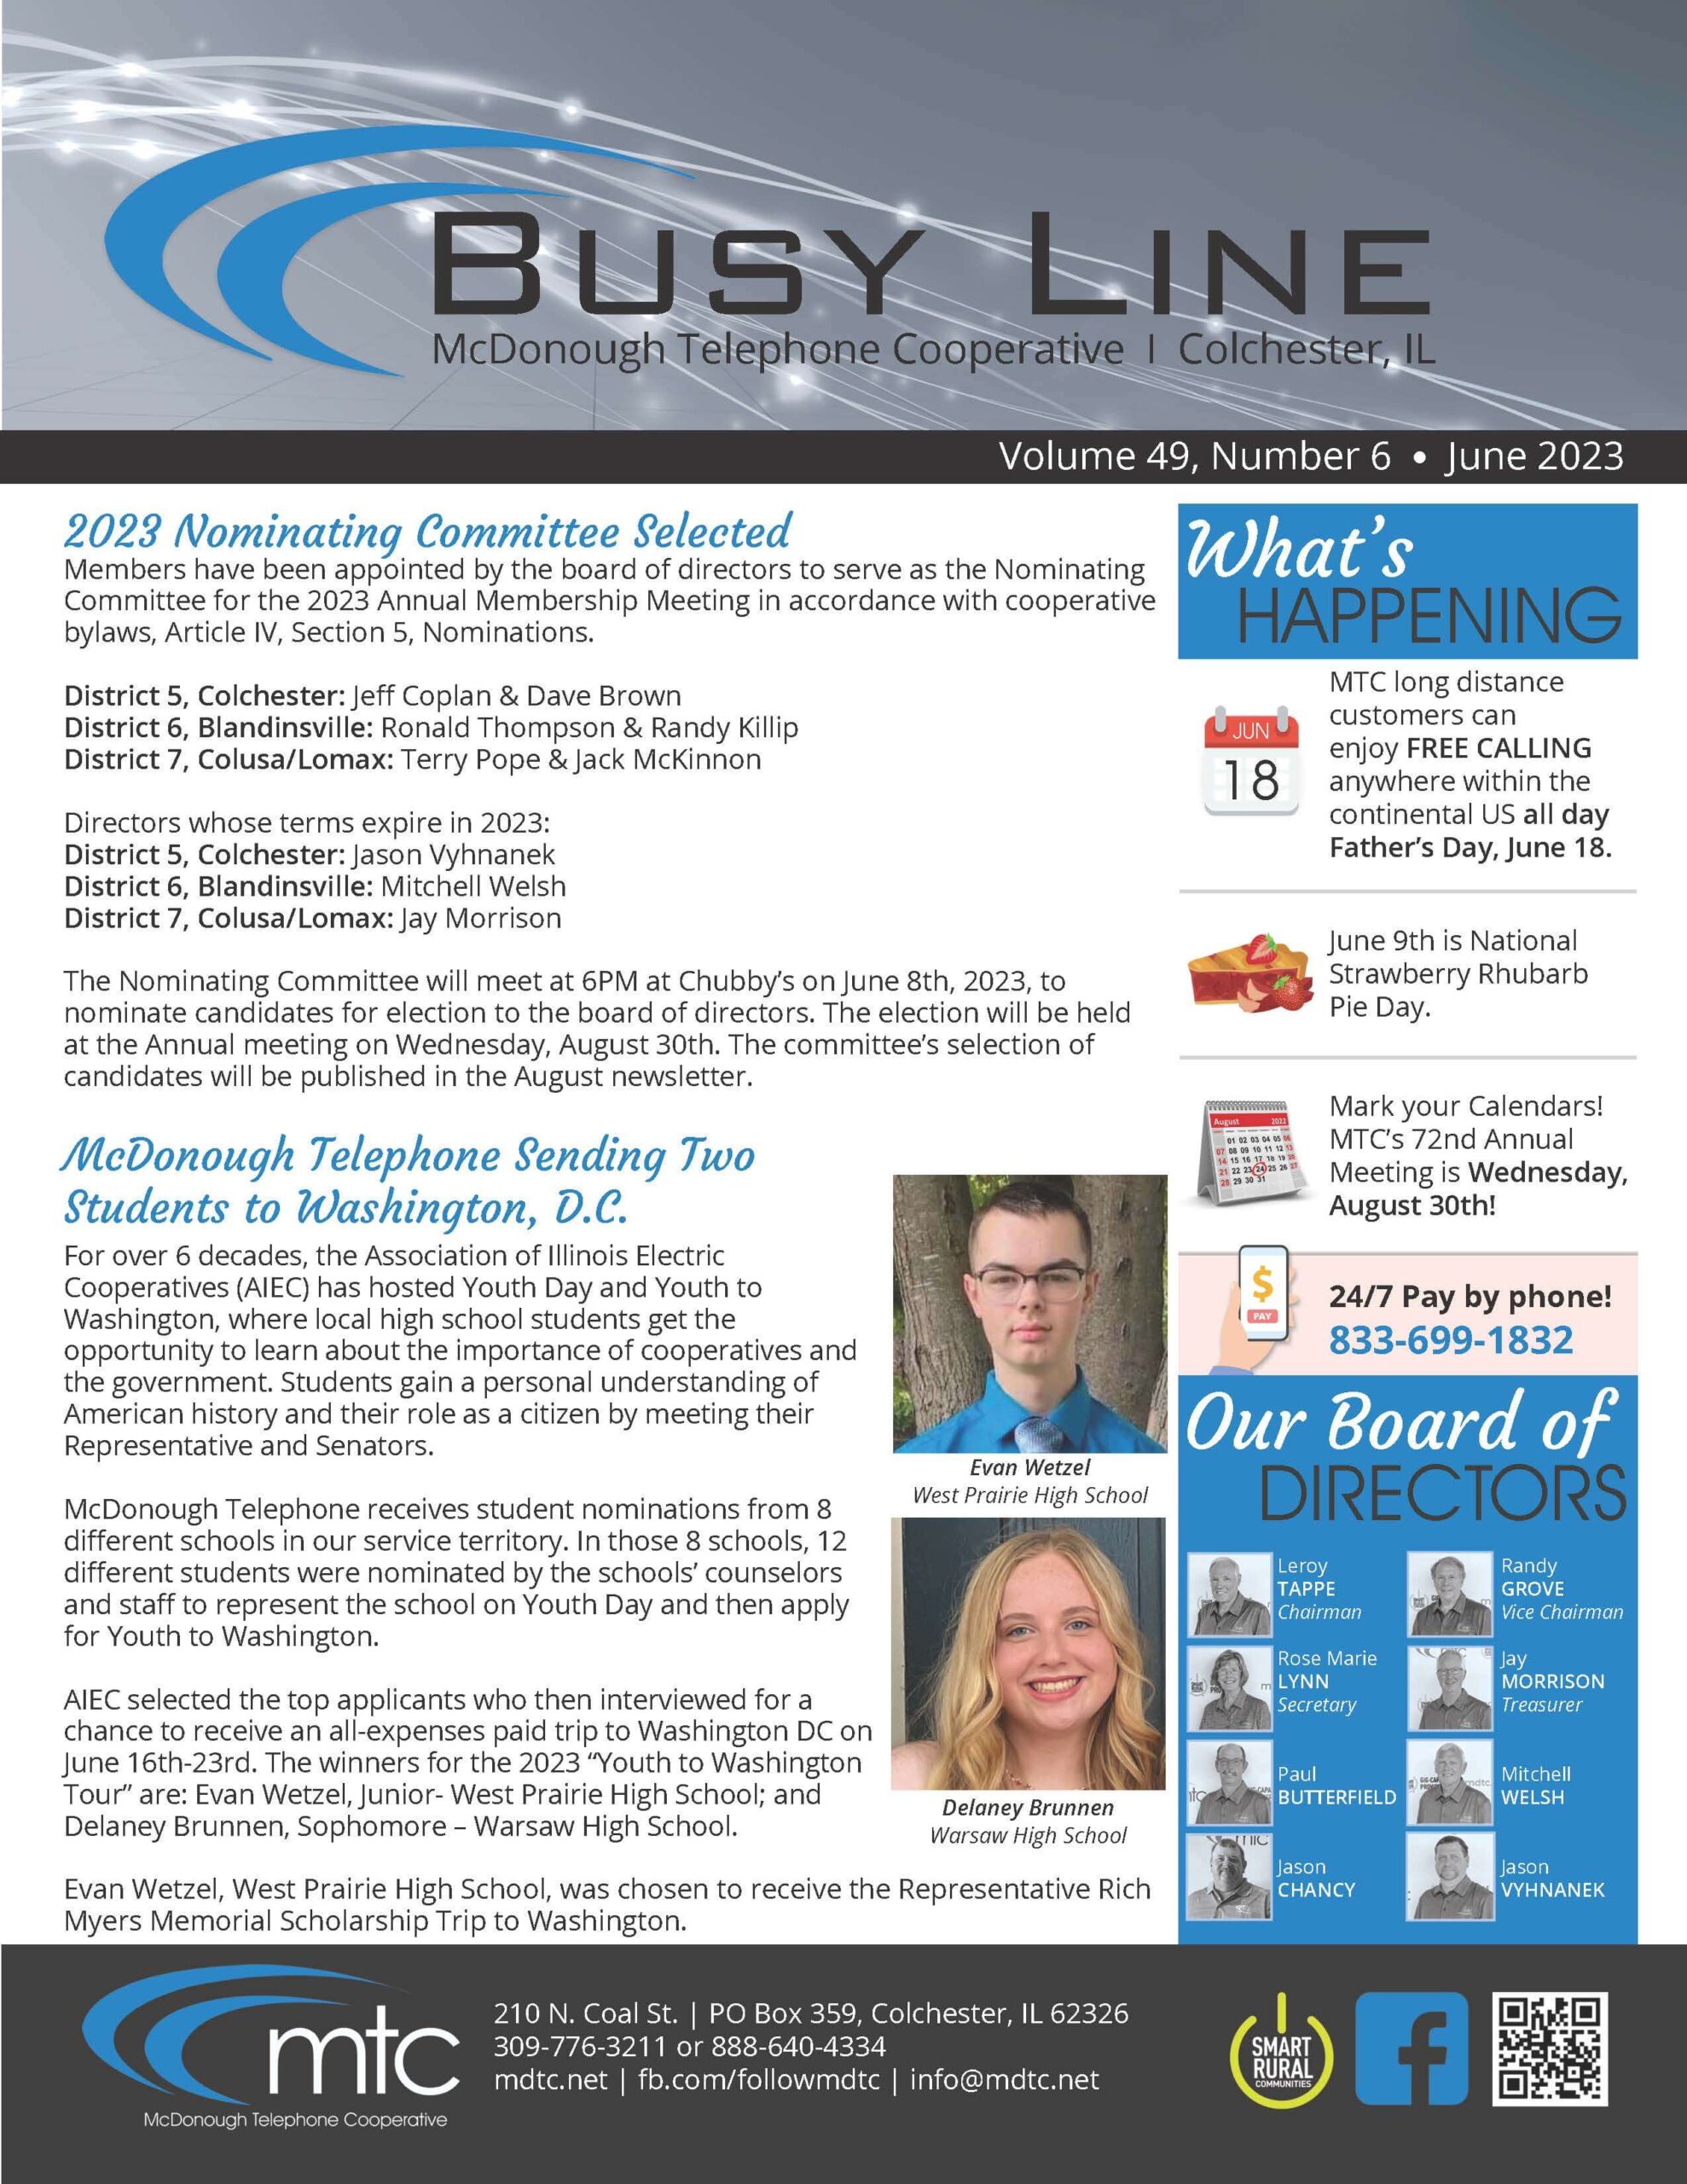 June 2023 Busy Line